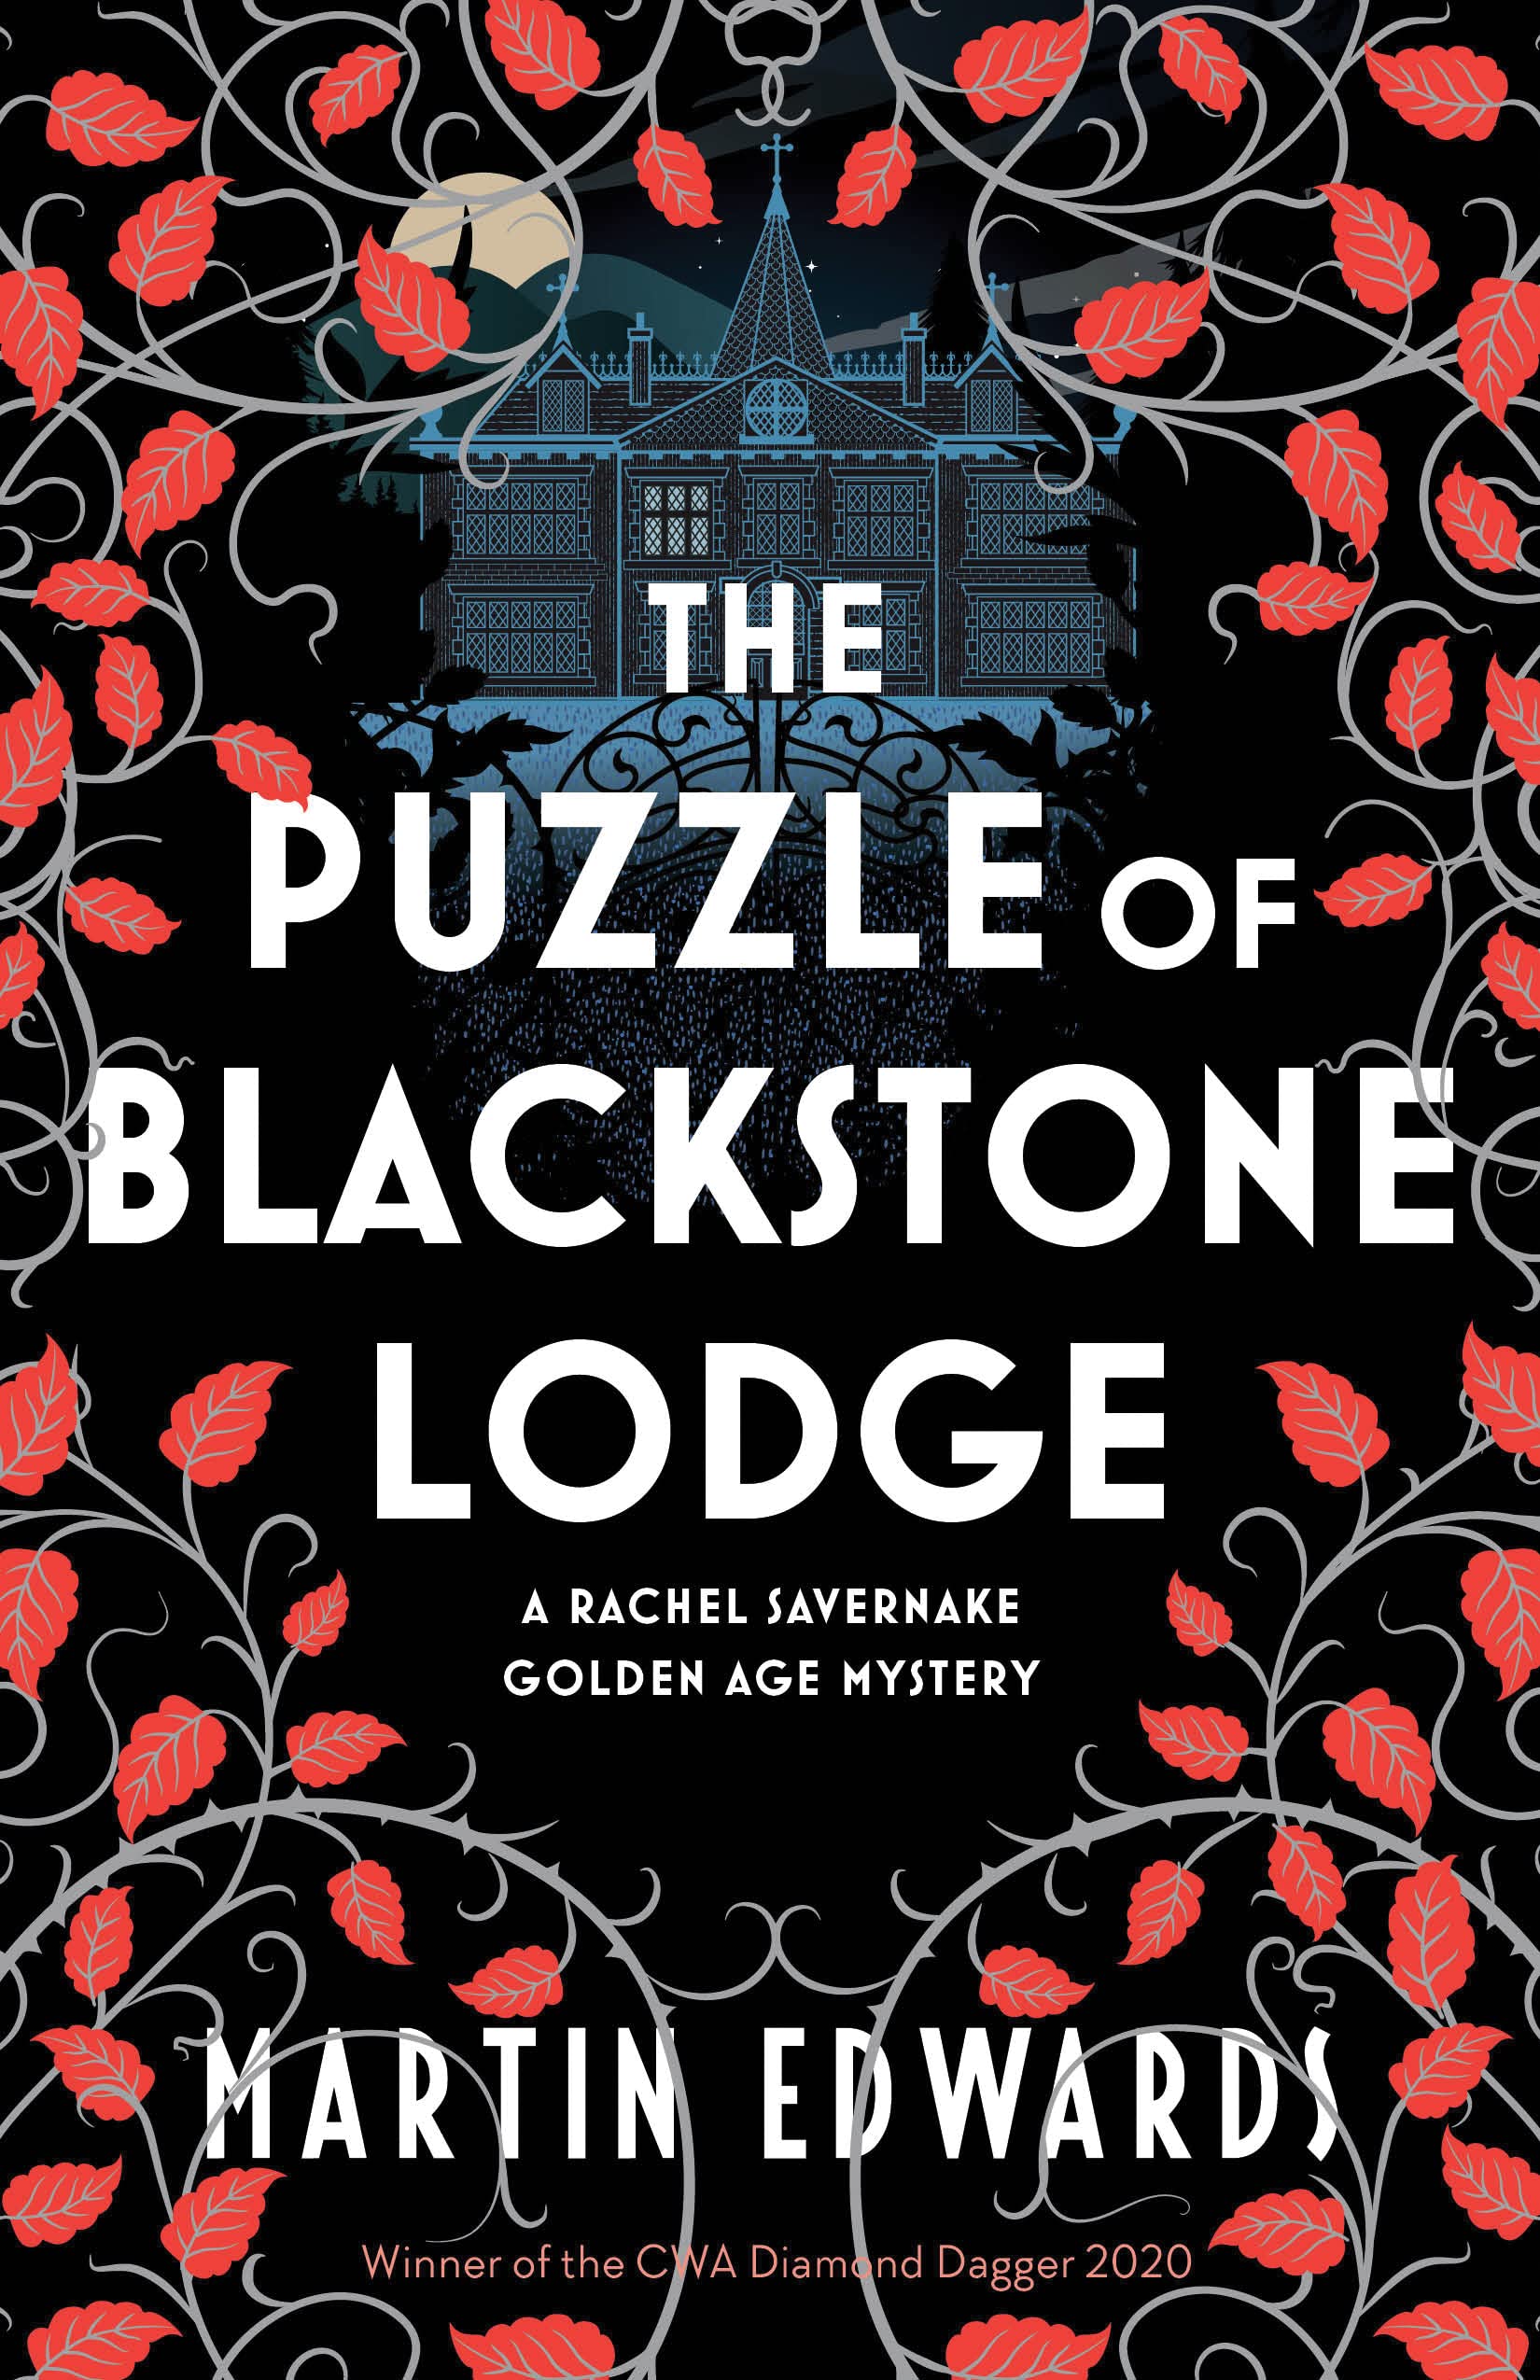 The Puzzle at Blackstone Lodge by Martin Edwards